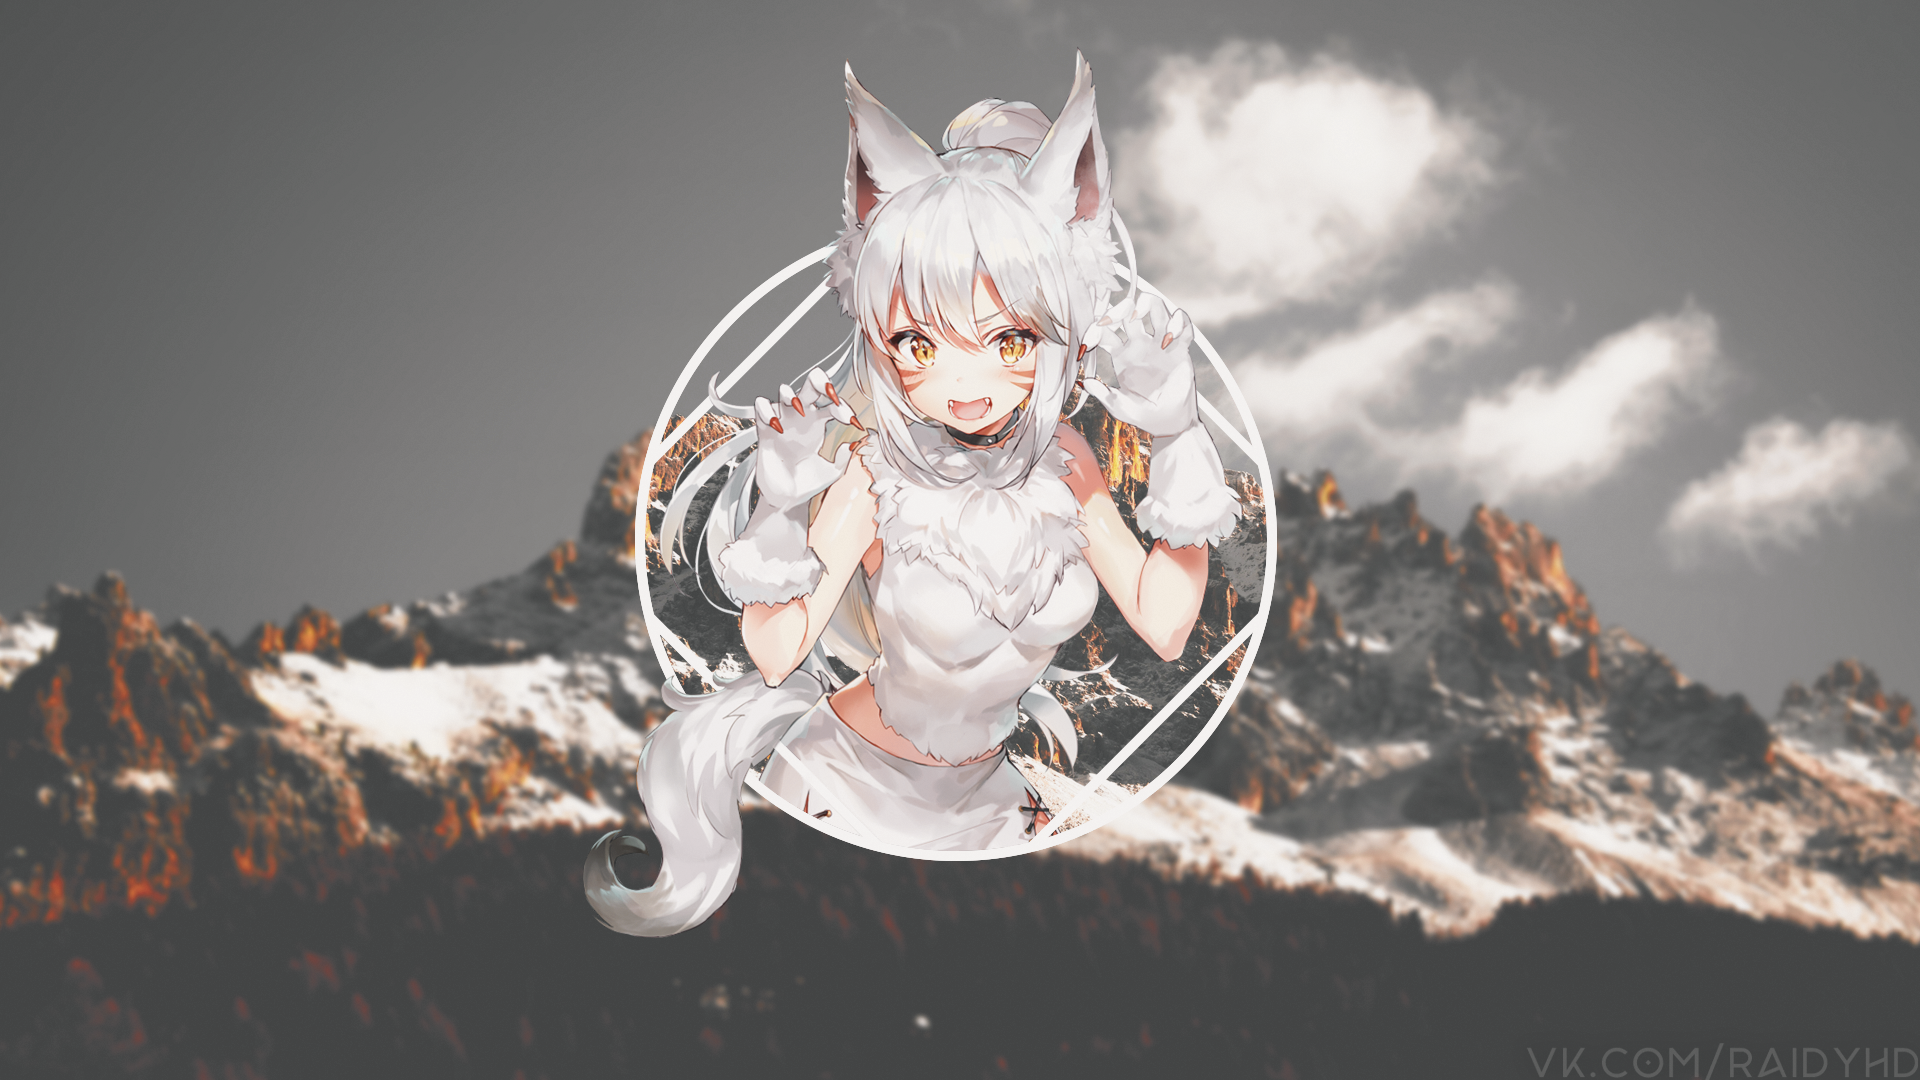 Anime Anime Girls Picture In Picture Miqote 1920x1080